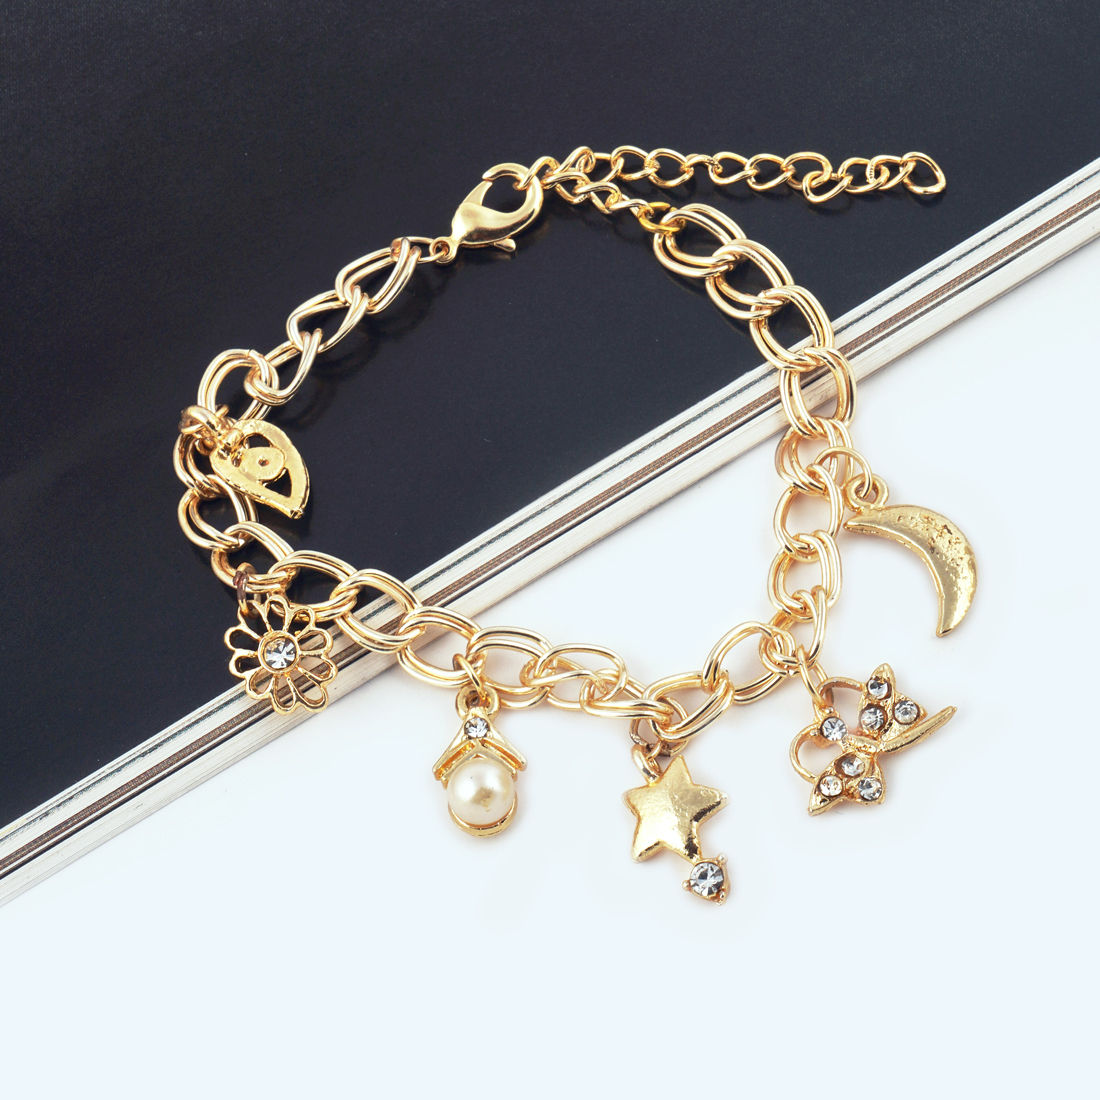 Buy Gold Chain Bracelet Thick Chain Bracelet 3mm 5mm Chain Online in India   Etsy